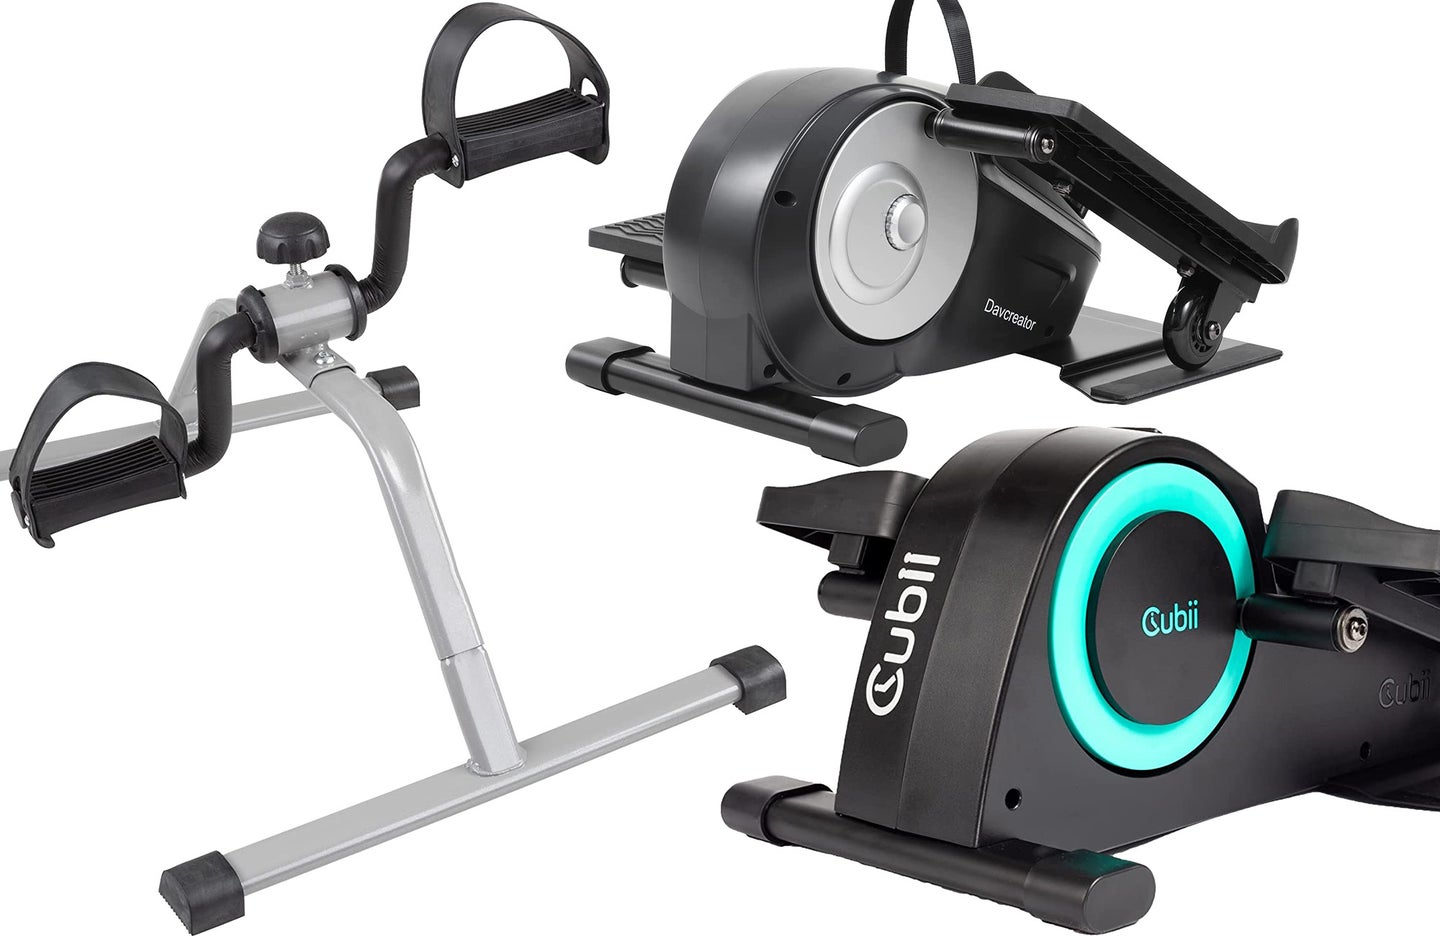 Get some exercise while you work with one of the best under-desk bikes.